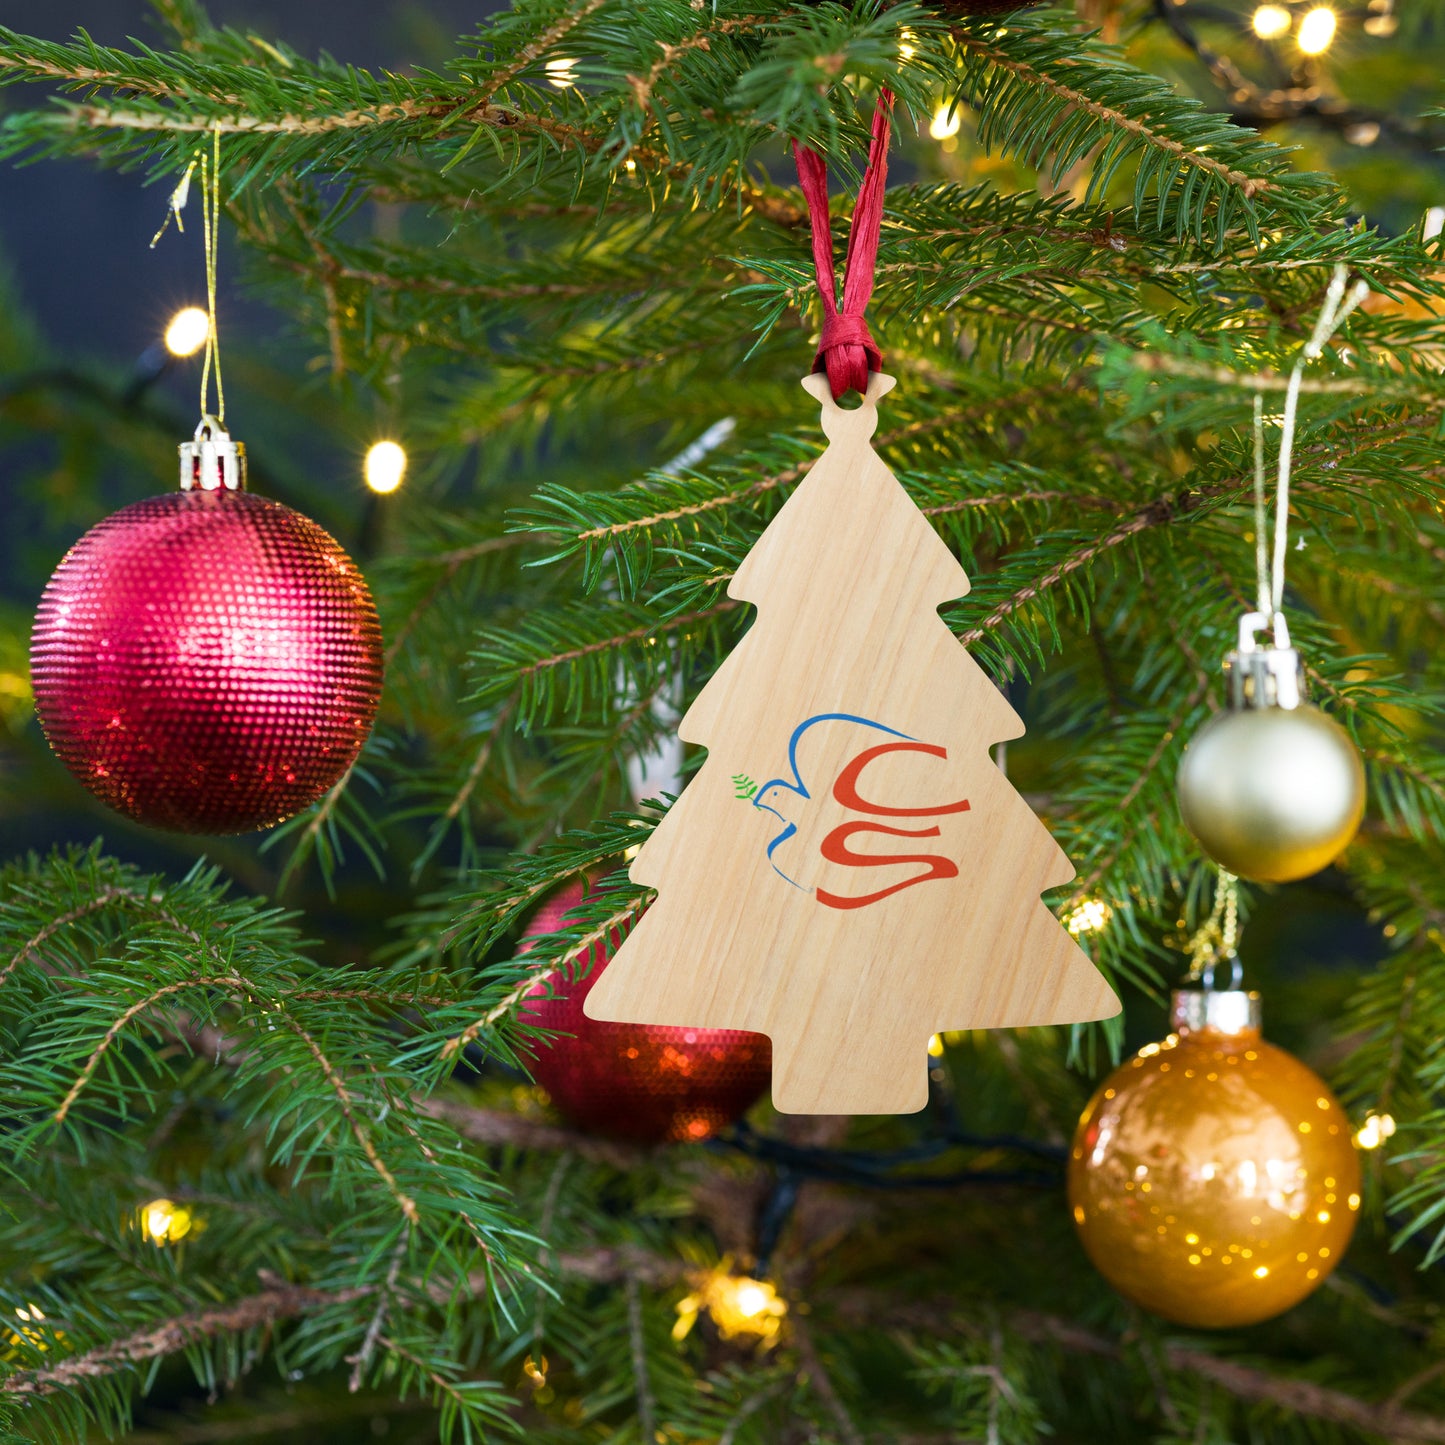 Wooden ornaments with Cabela and Schmitt logo